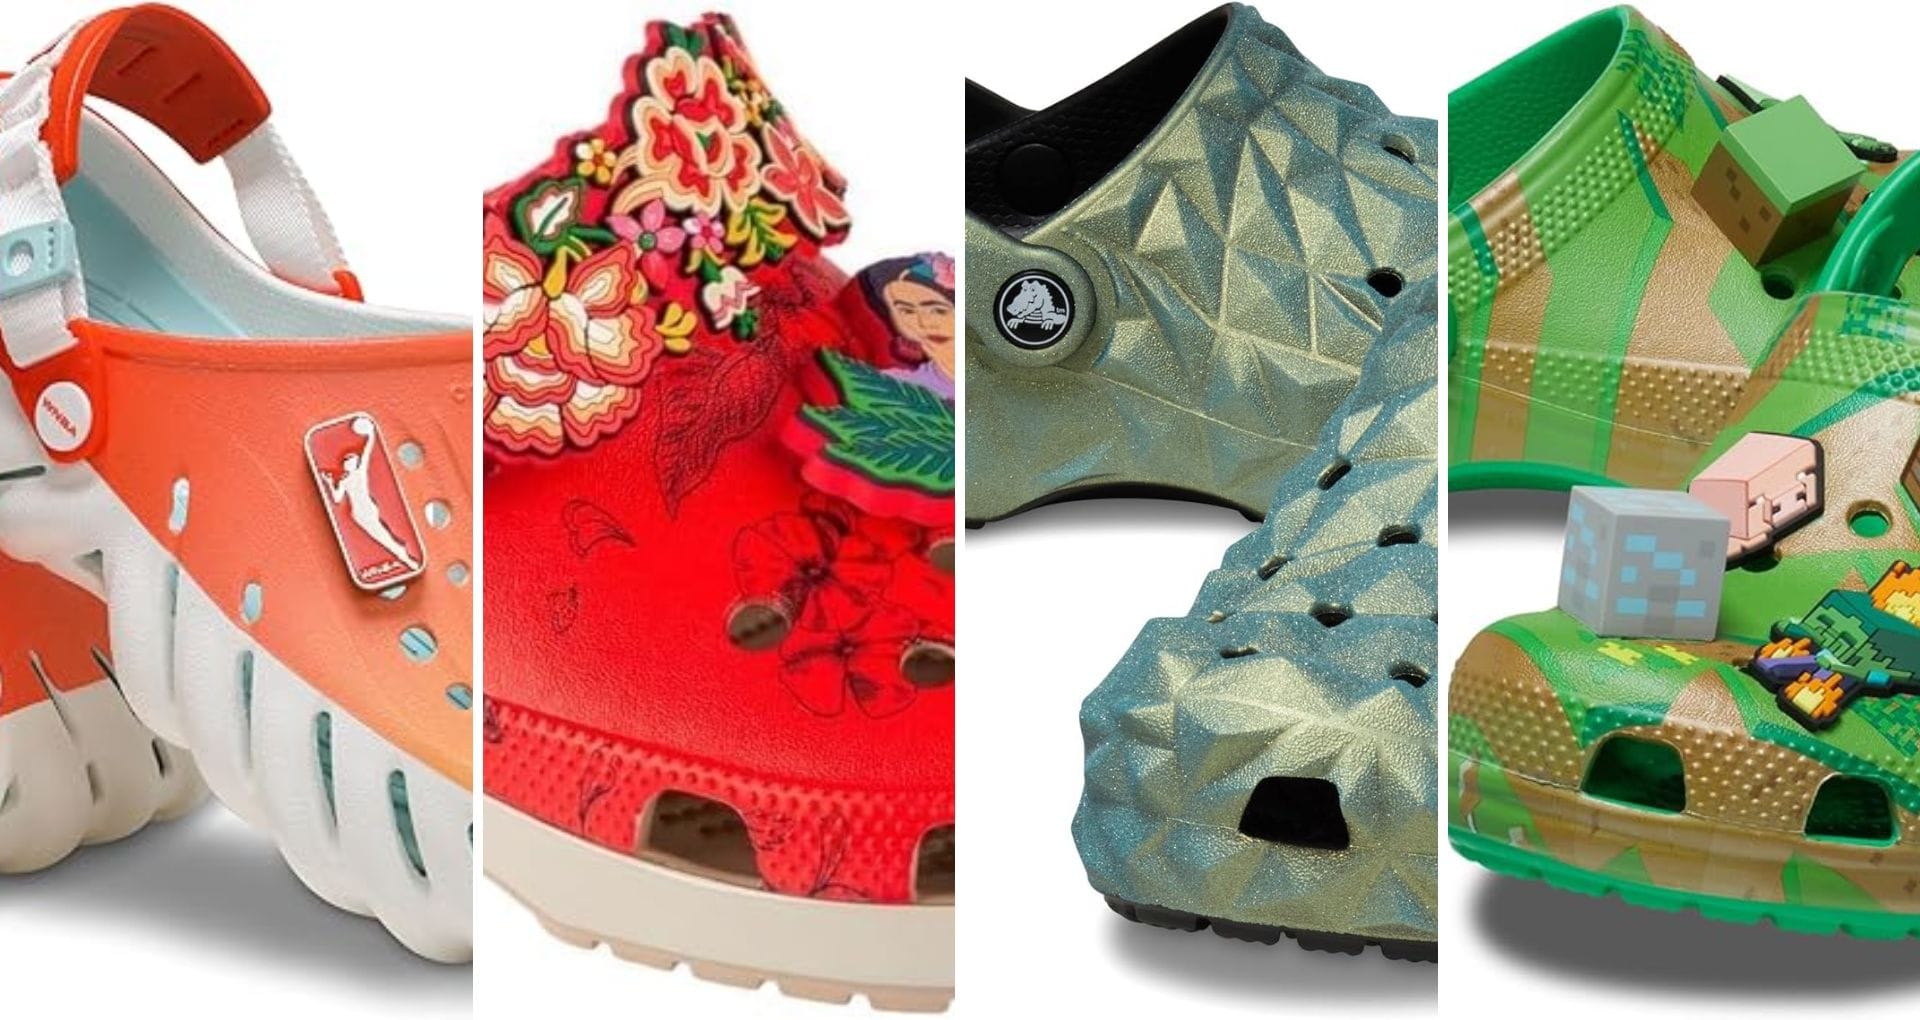 Crocs for every step, fashion style and age group.